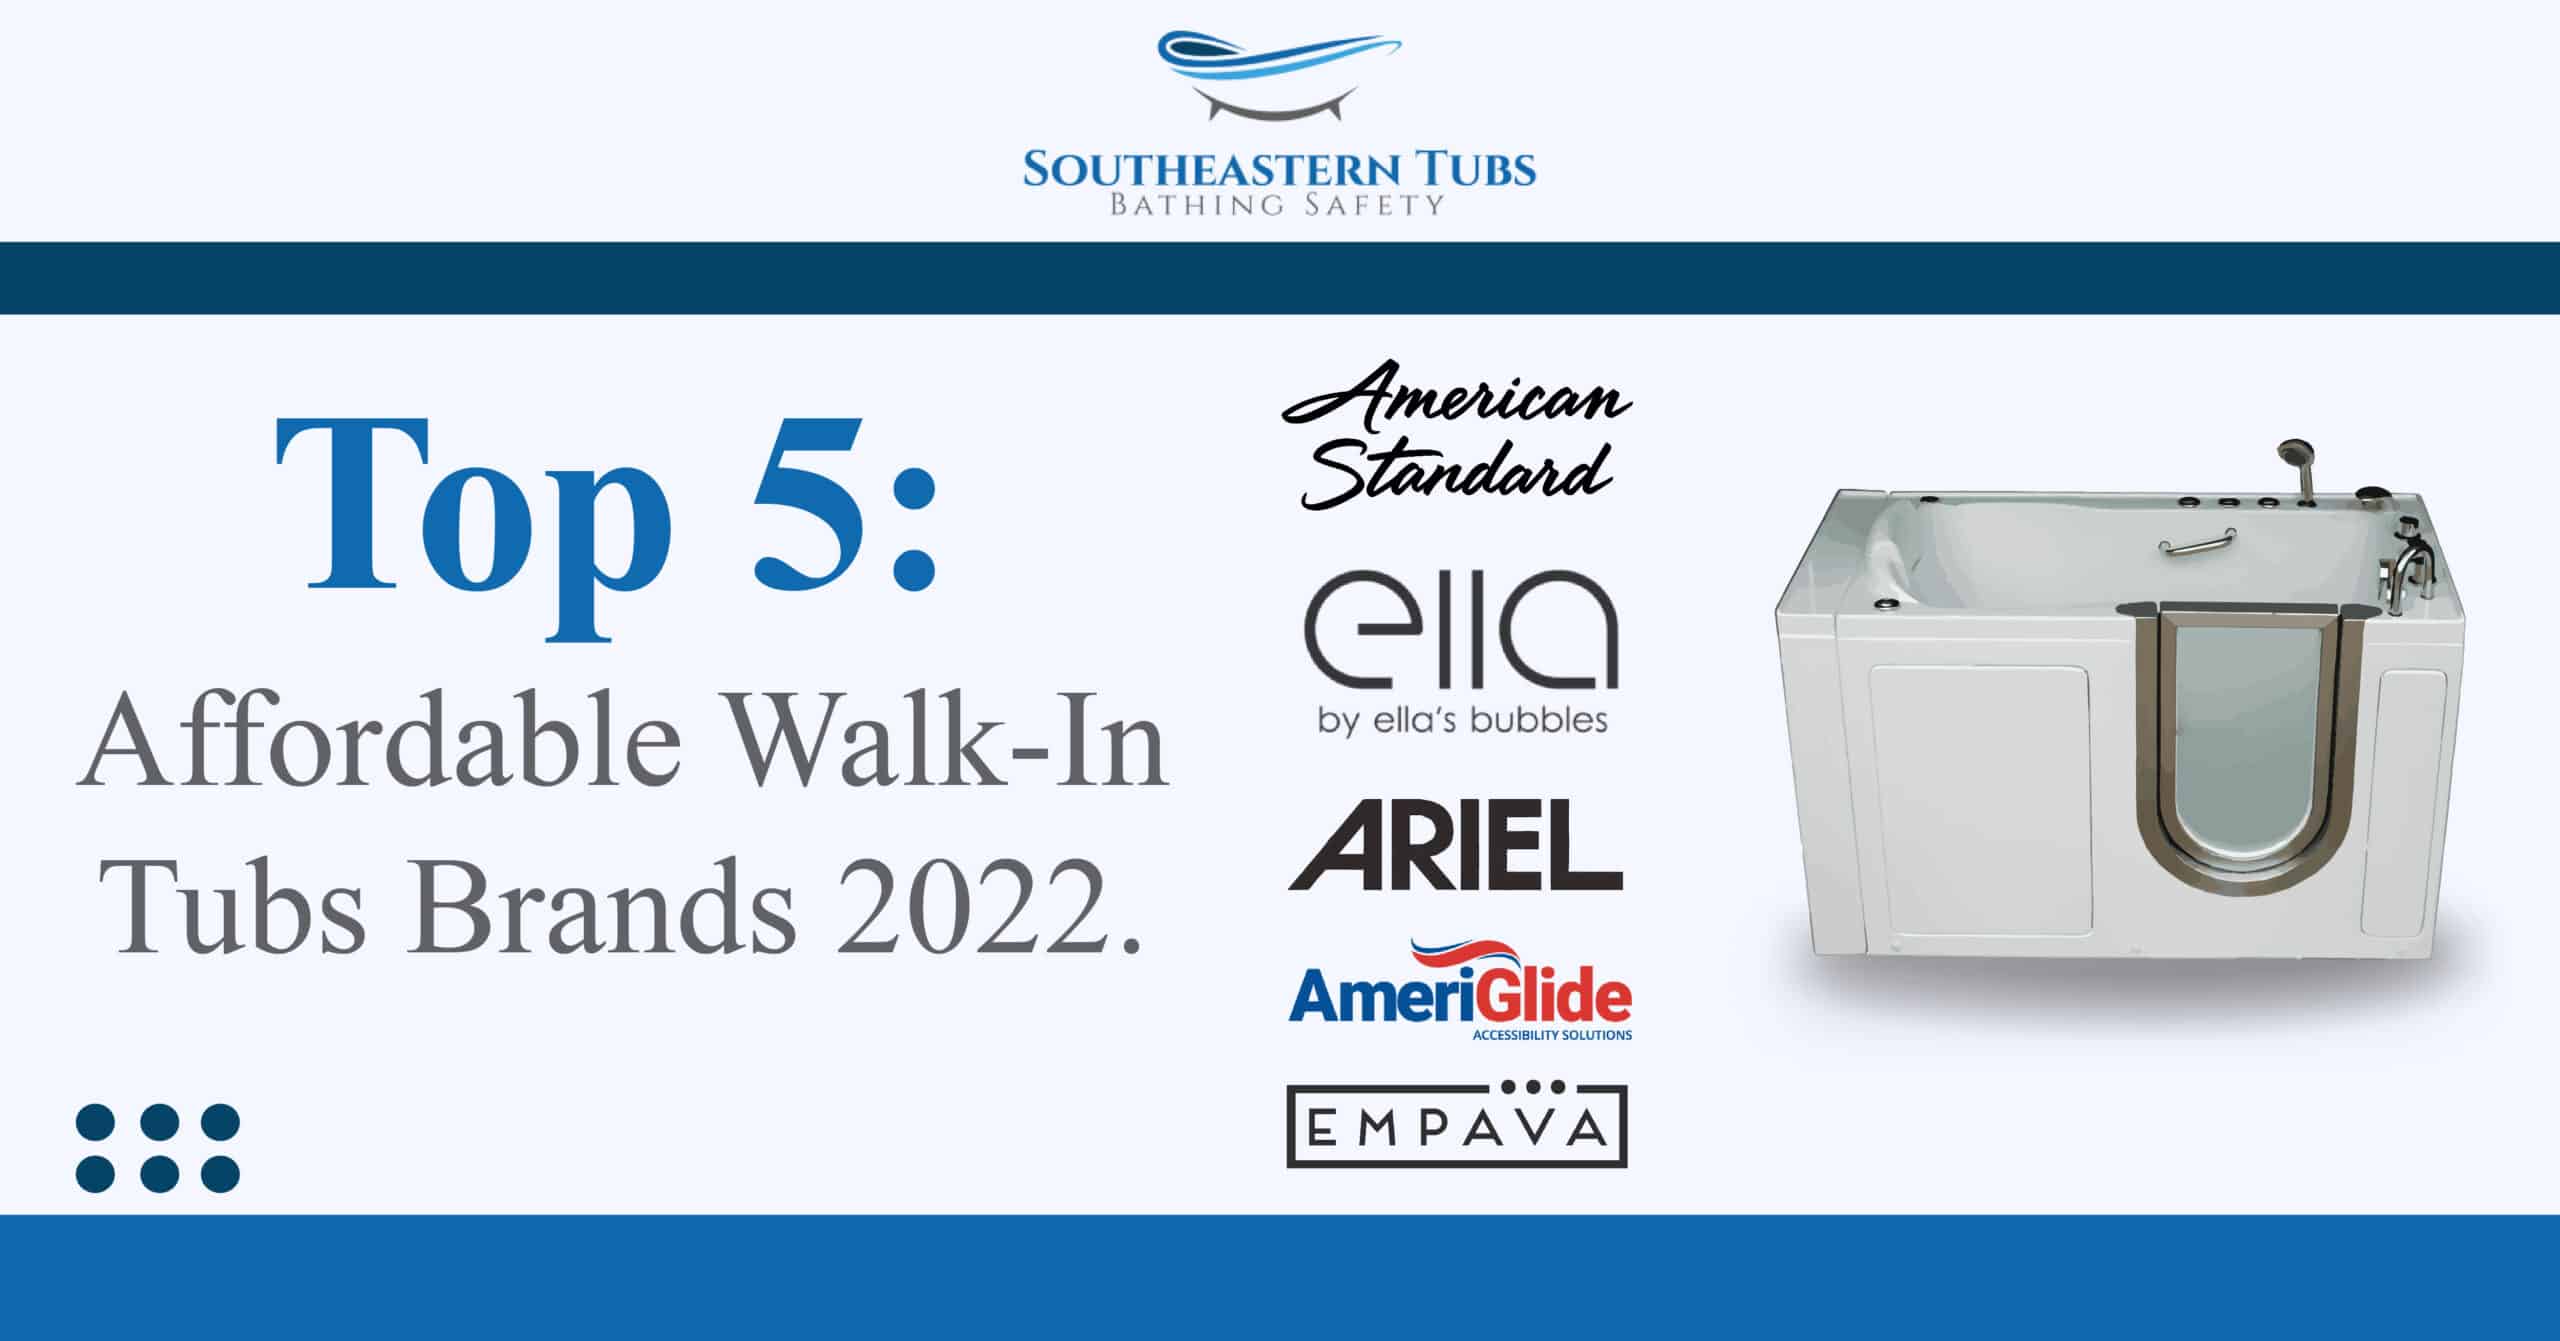 Top 5 affordable walk-in tubs Brands 2022